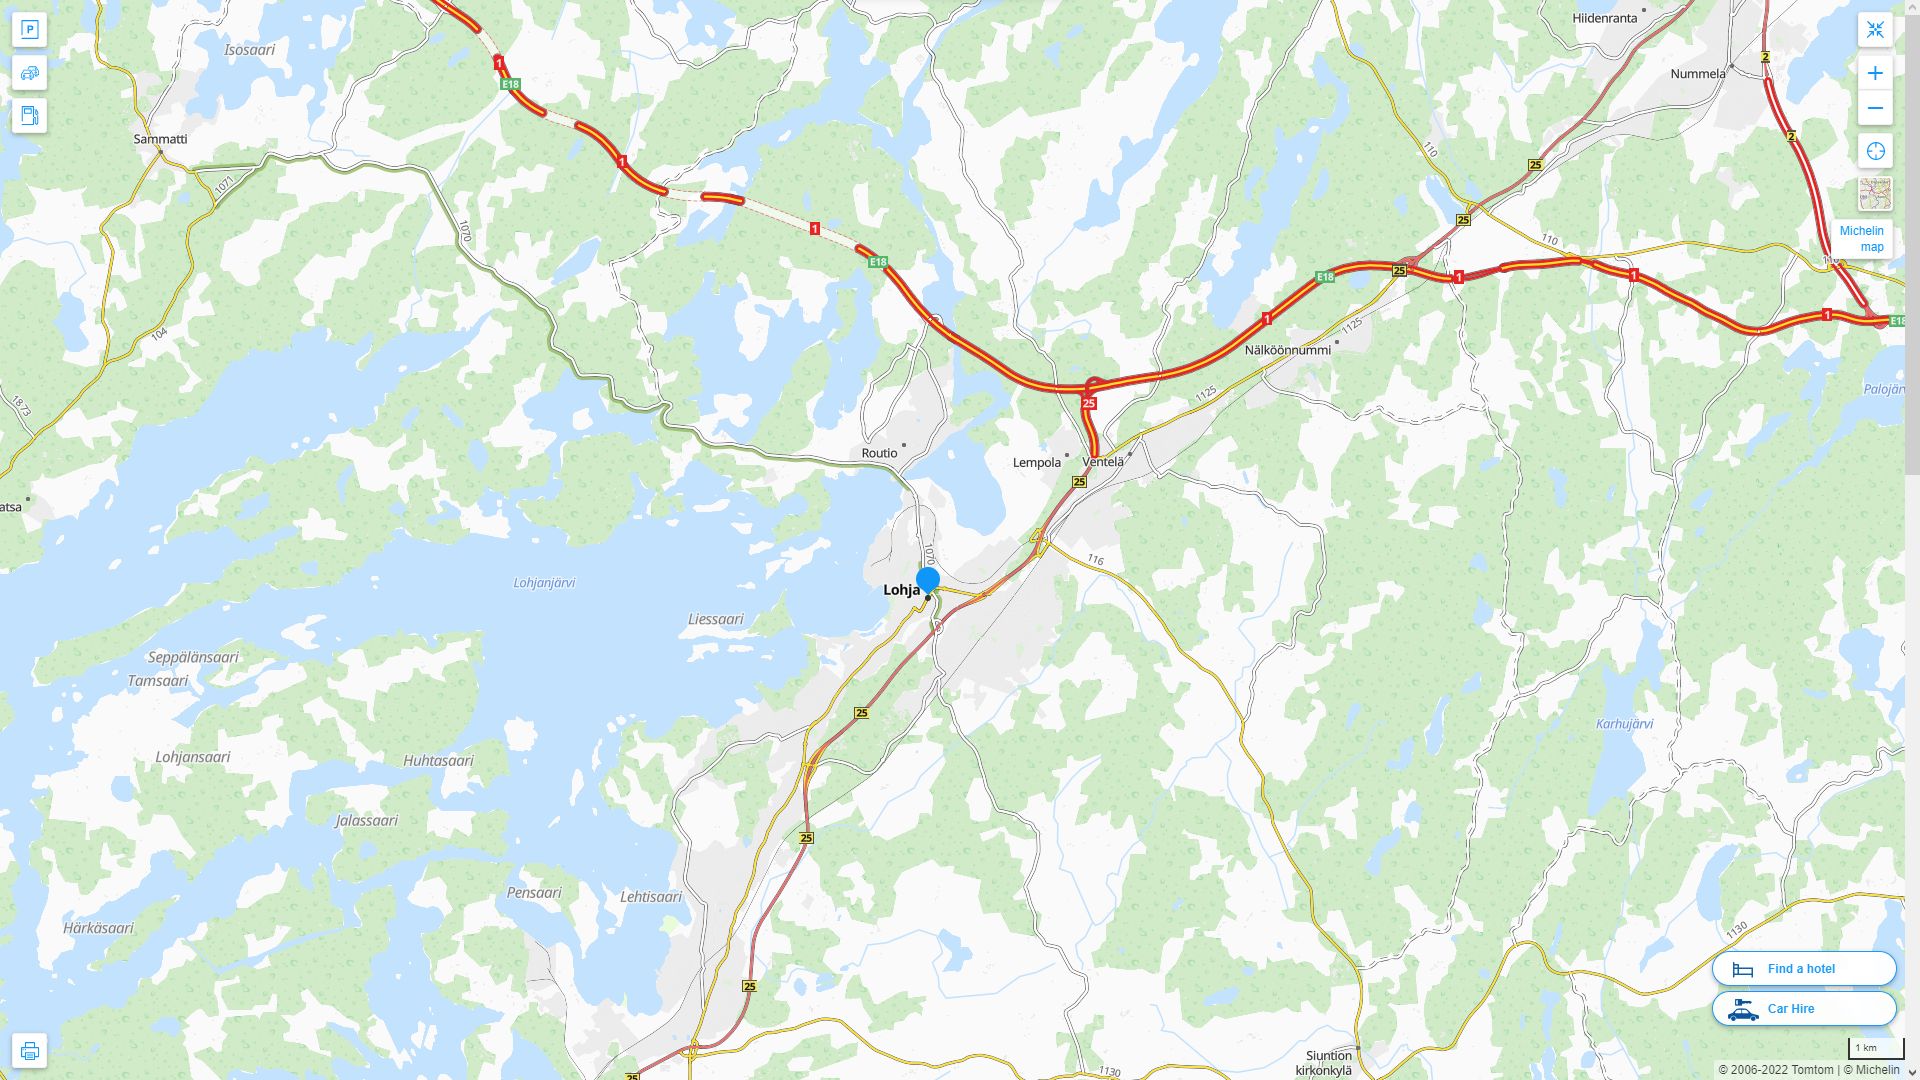 Lohja Highway and Road Map